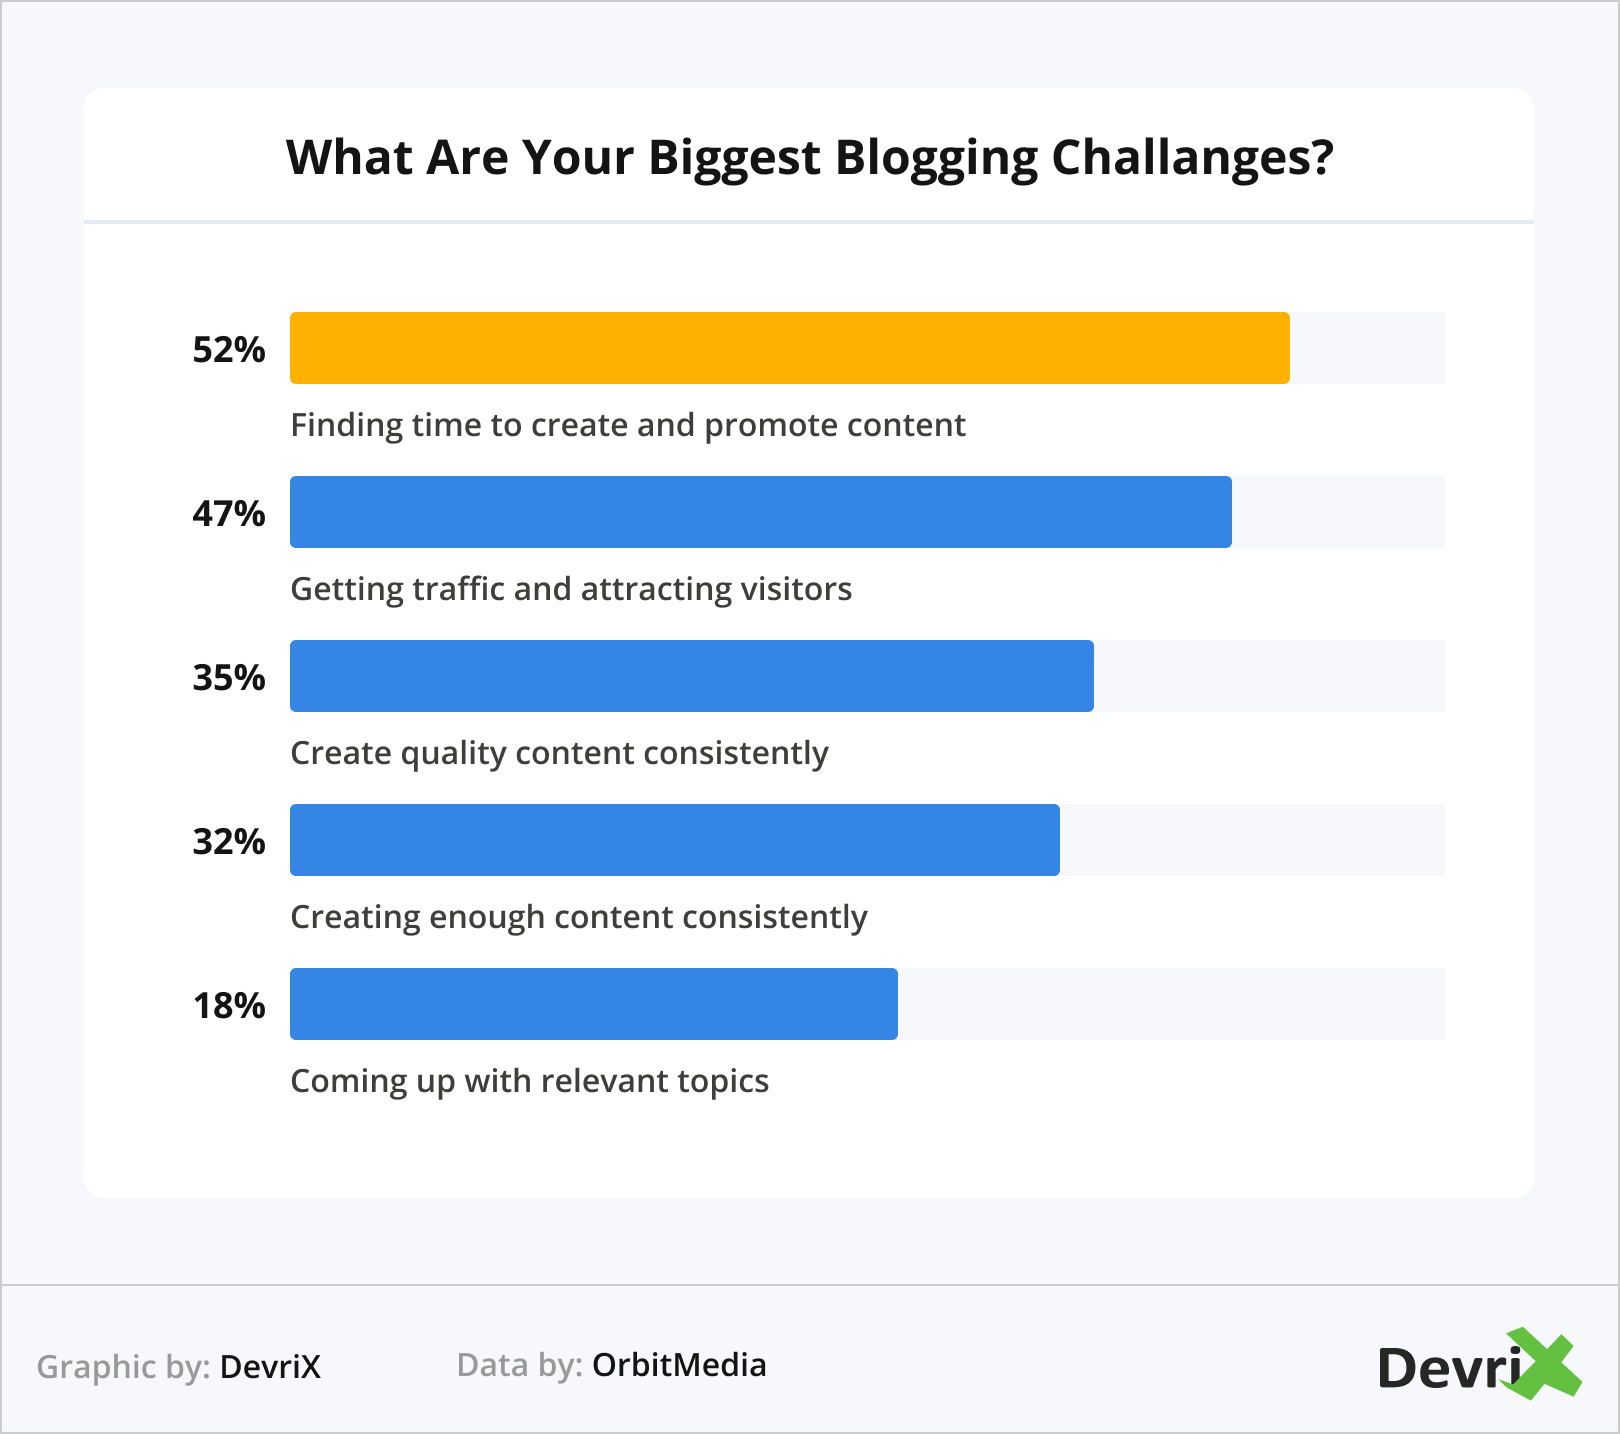 What Are Your Biggest Blogging Challenges